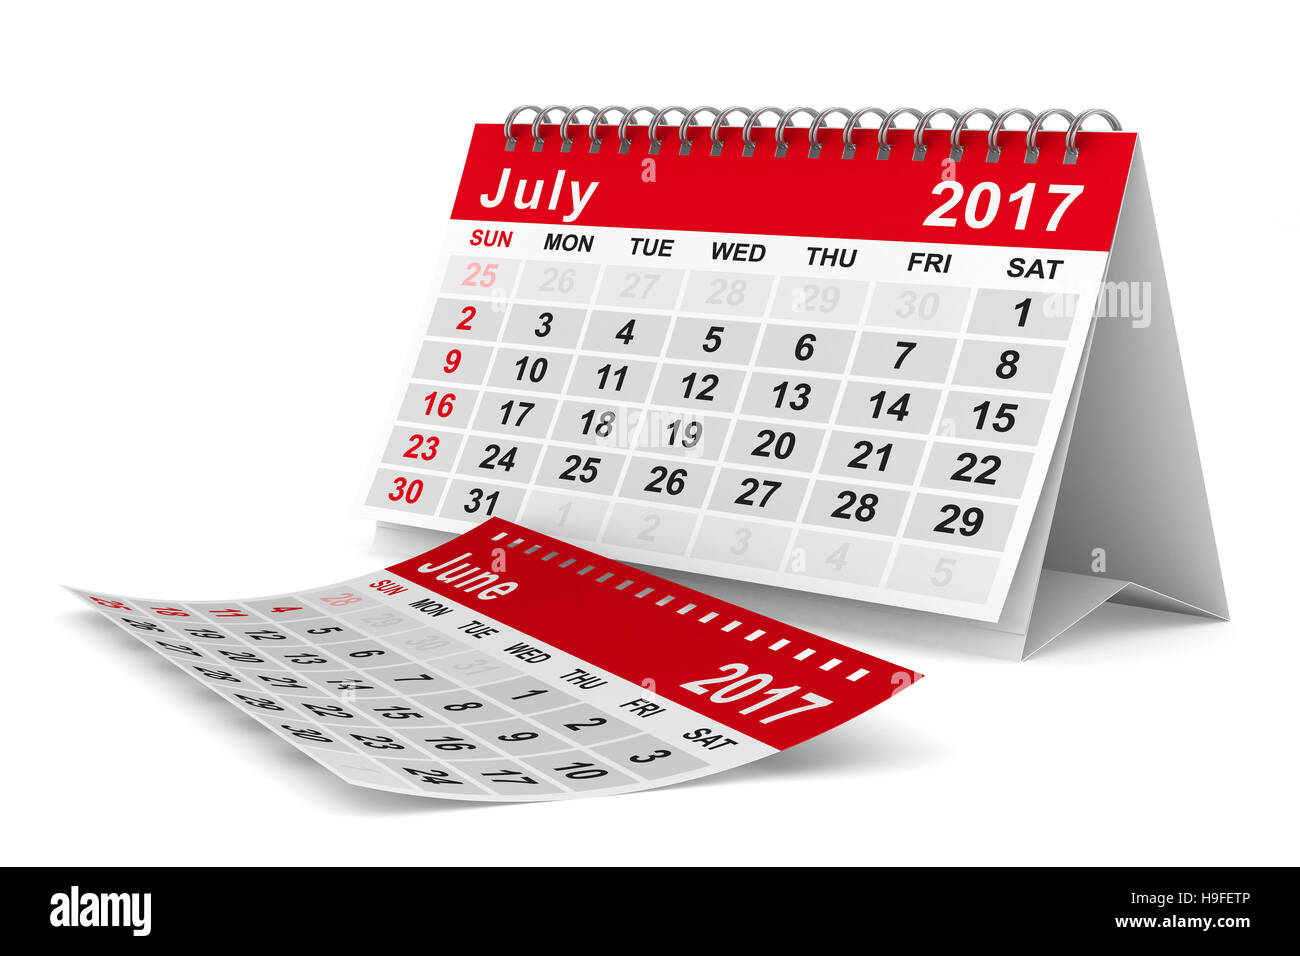 2017 year calendar. July. Isolated 3D image Stock Photo